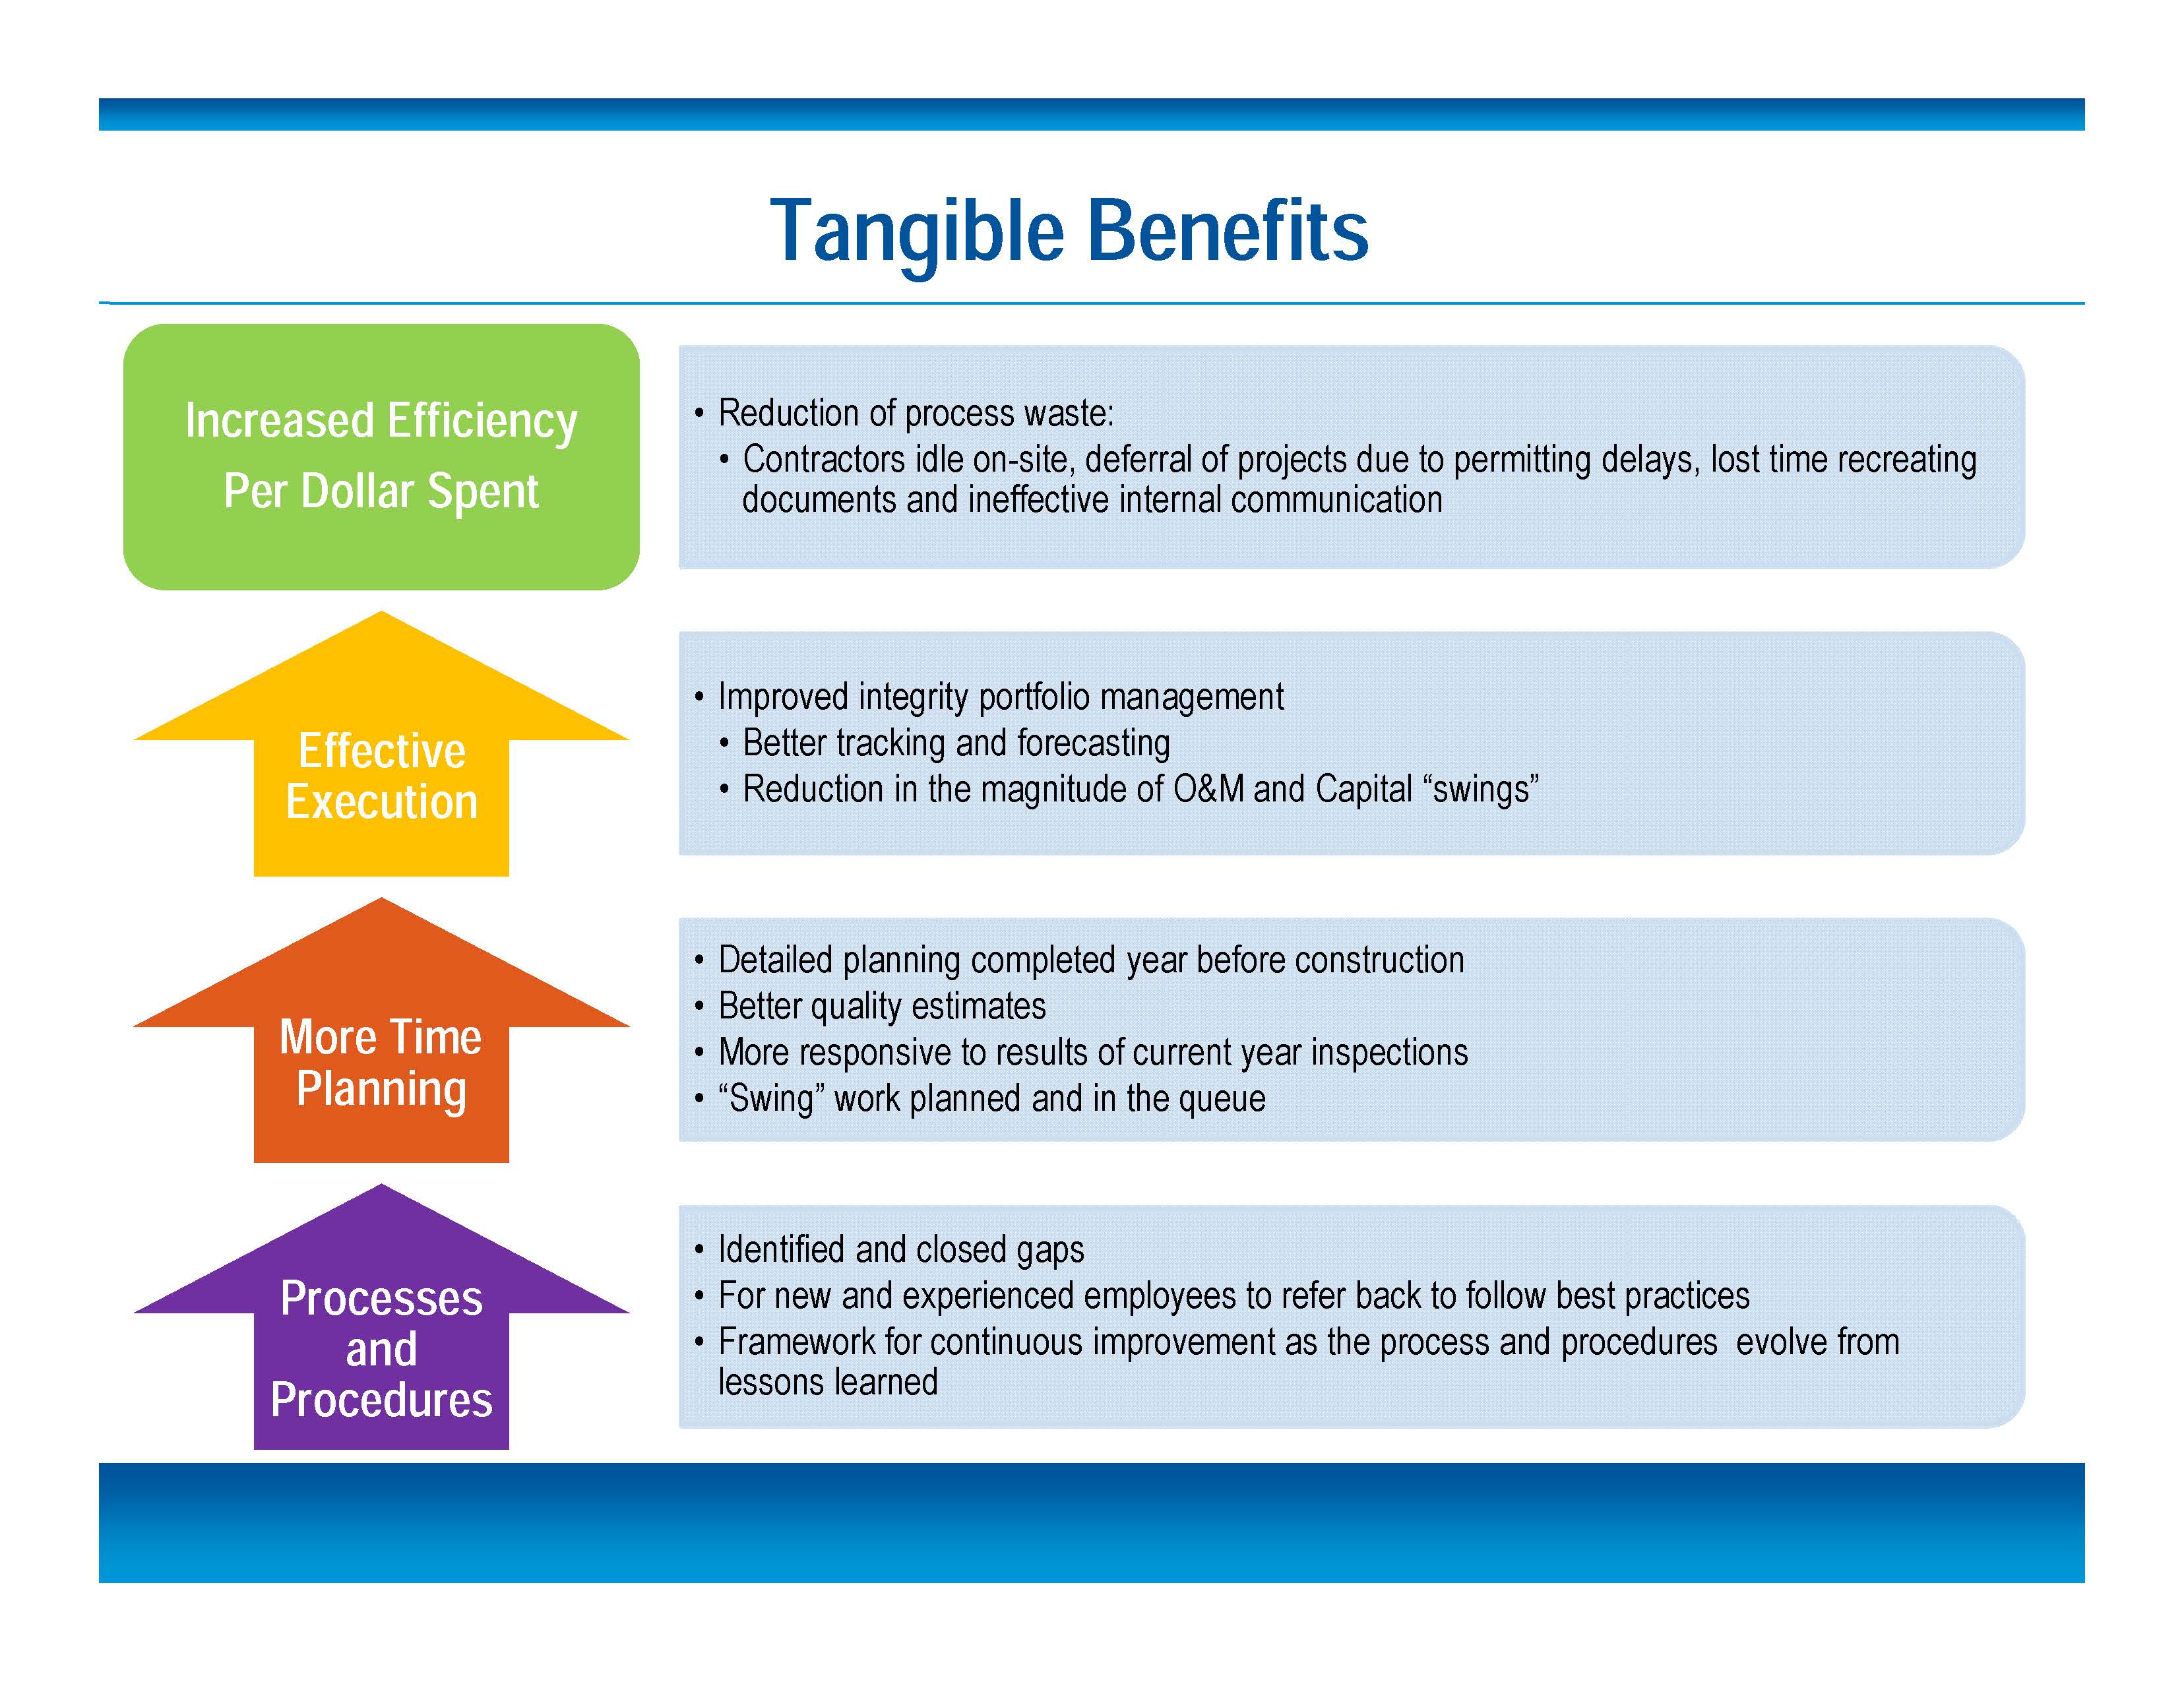 Tangible Benefits Oil and Gas